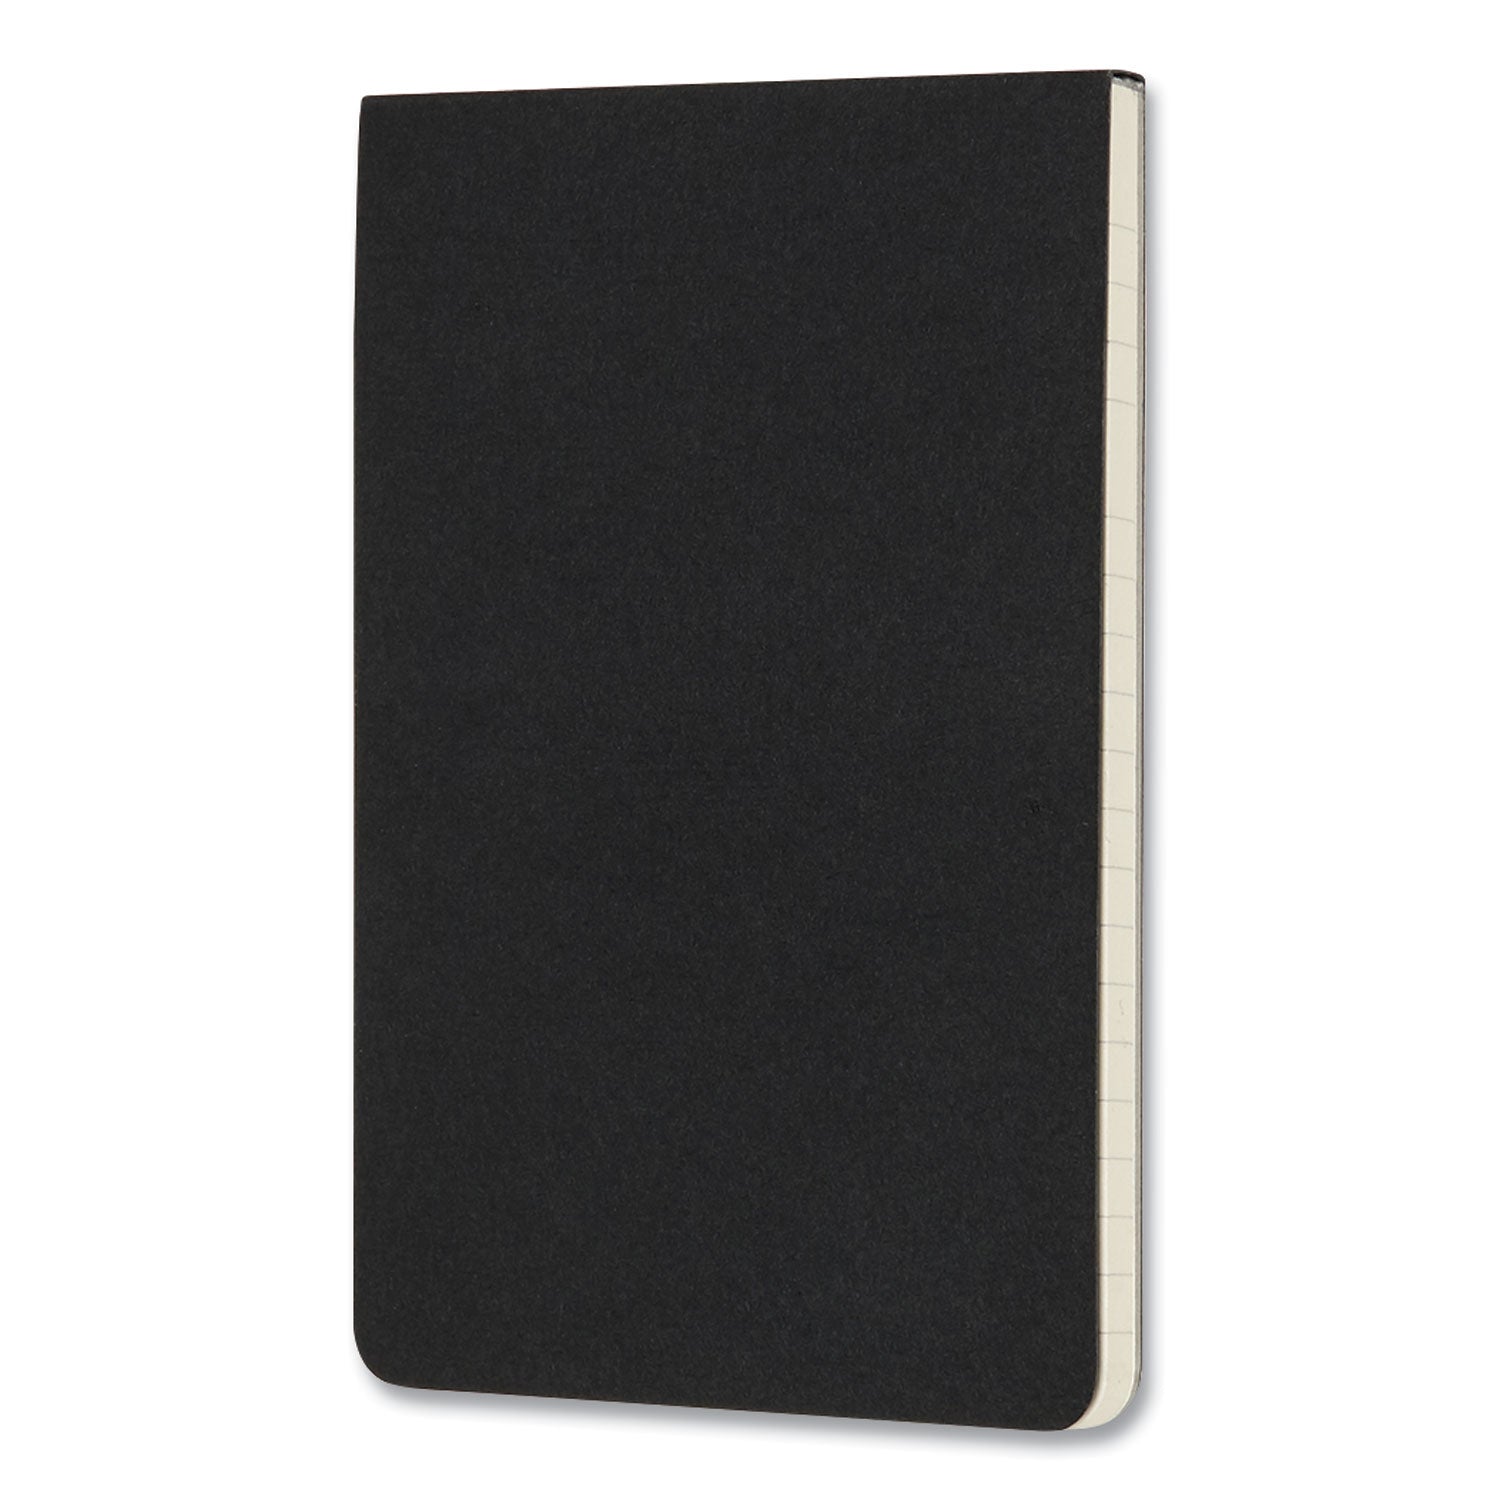 pro-pad-meeting-minutes-notes-format-black-cover-96-ivory-35-x-55-sheets_hbg620909 - 2